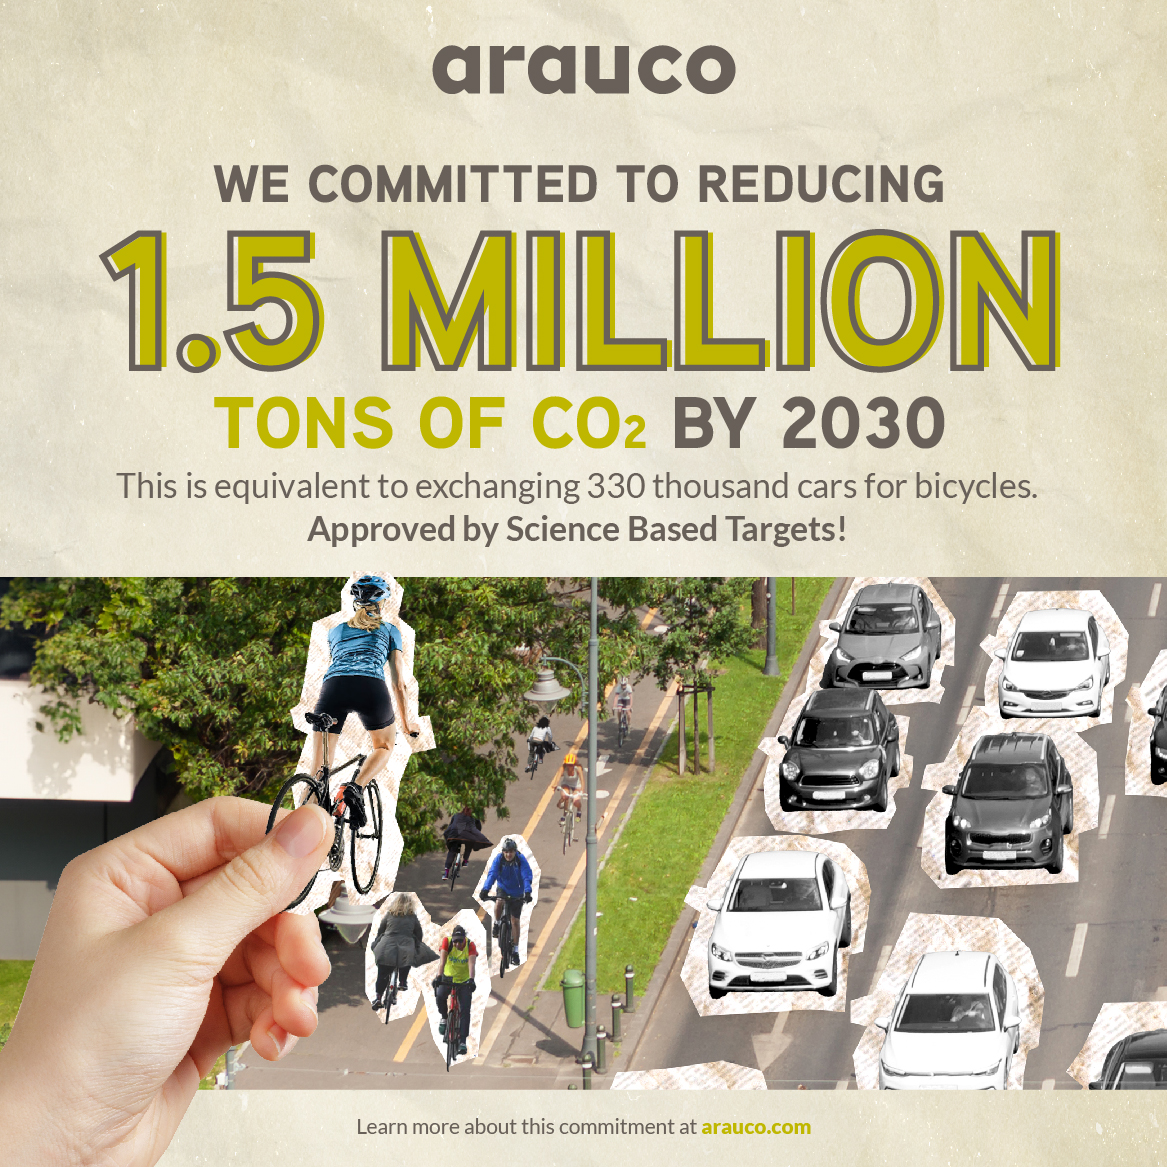 ARAUCO receives approval of Science Based Targets and commits to reducing its emissions by more than 1.5 million tons by 2030